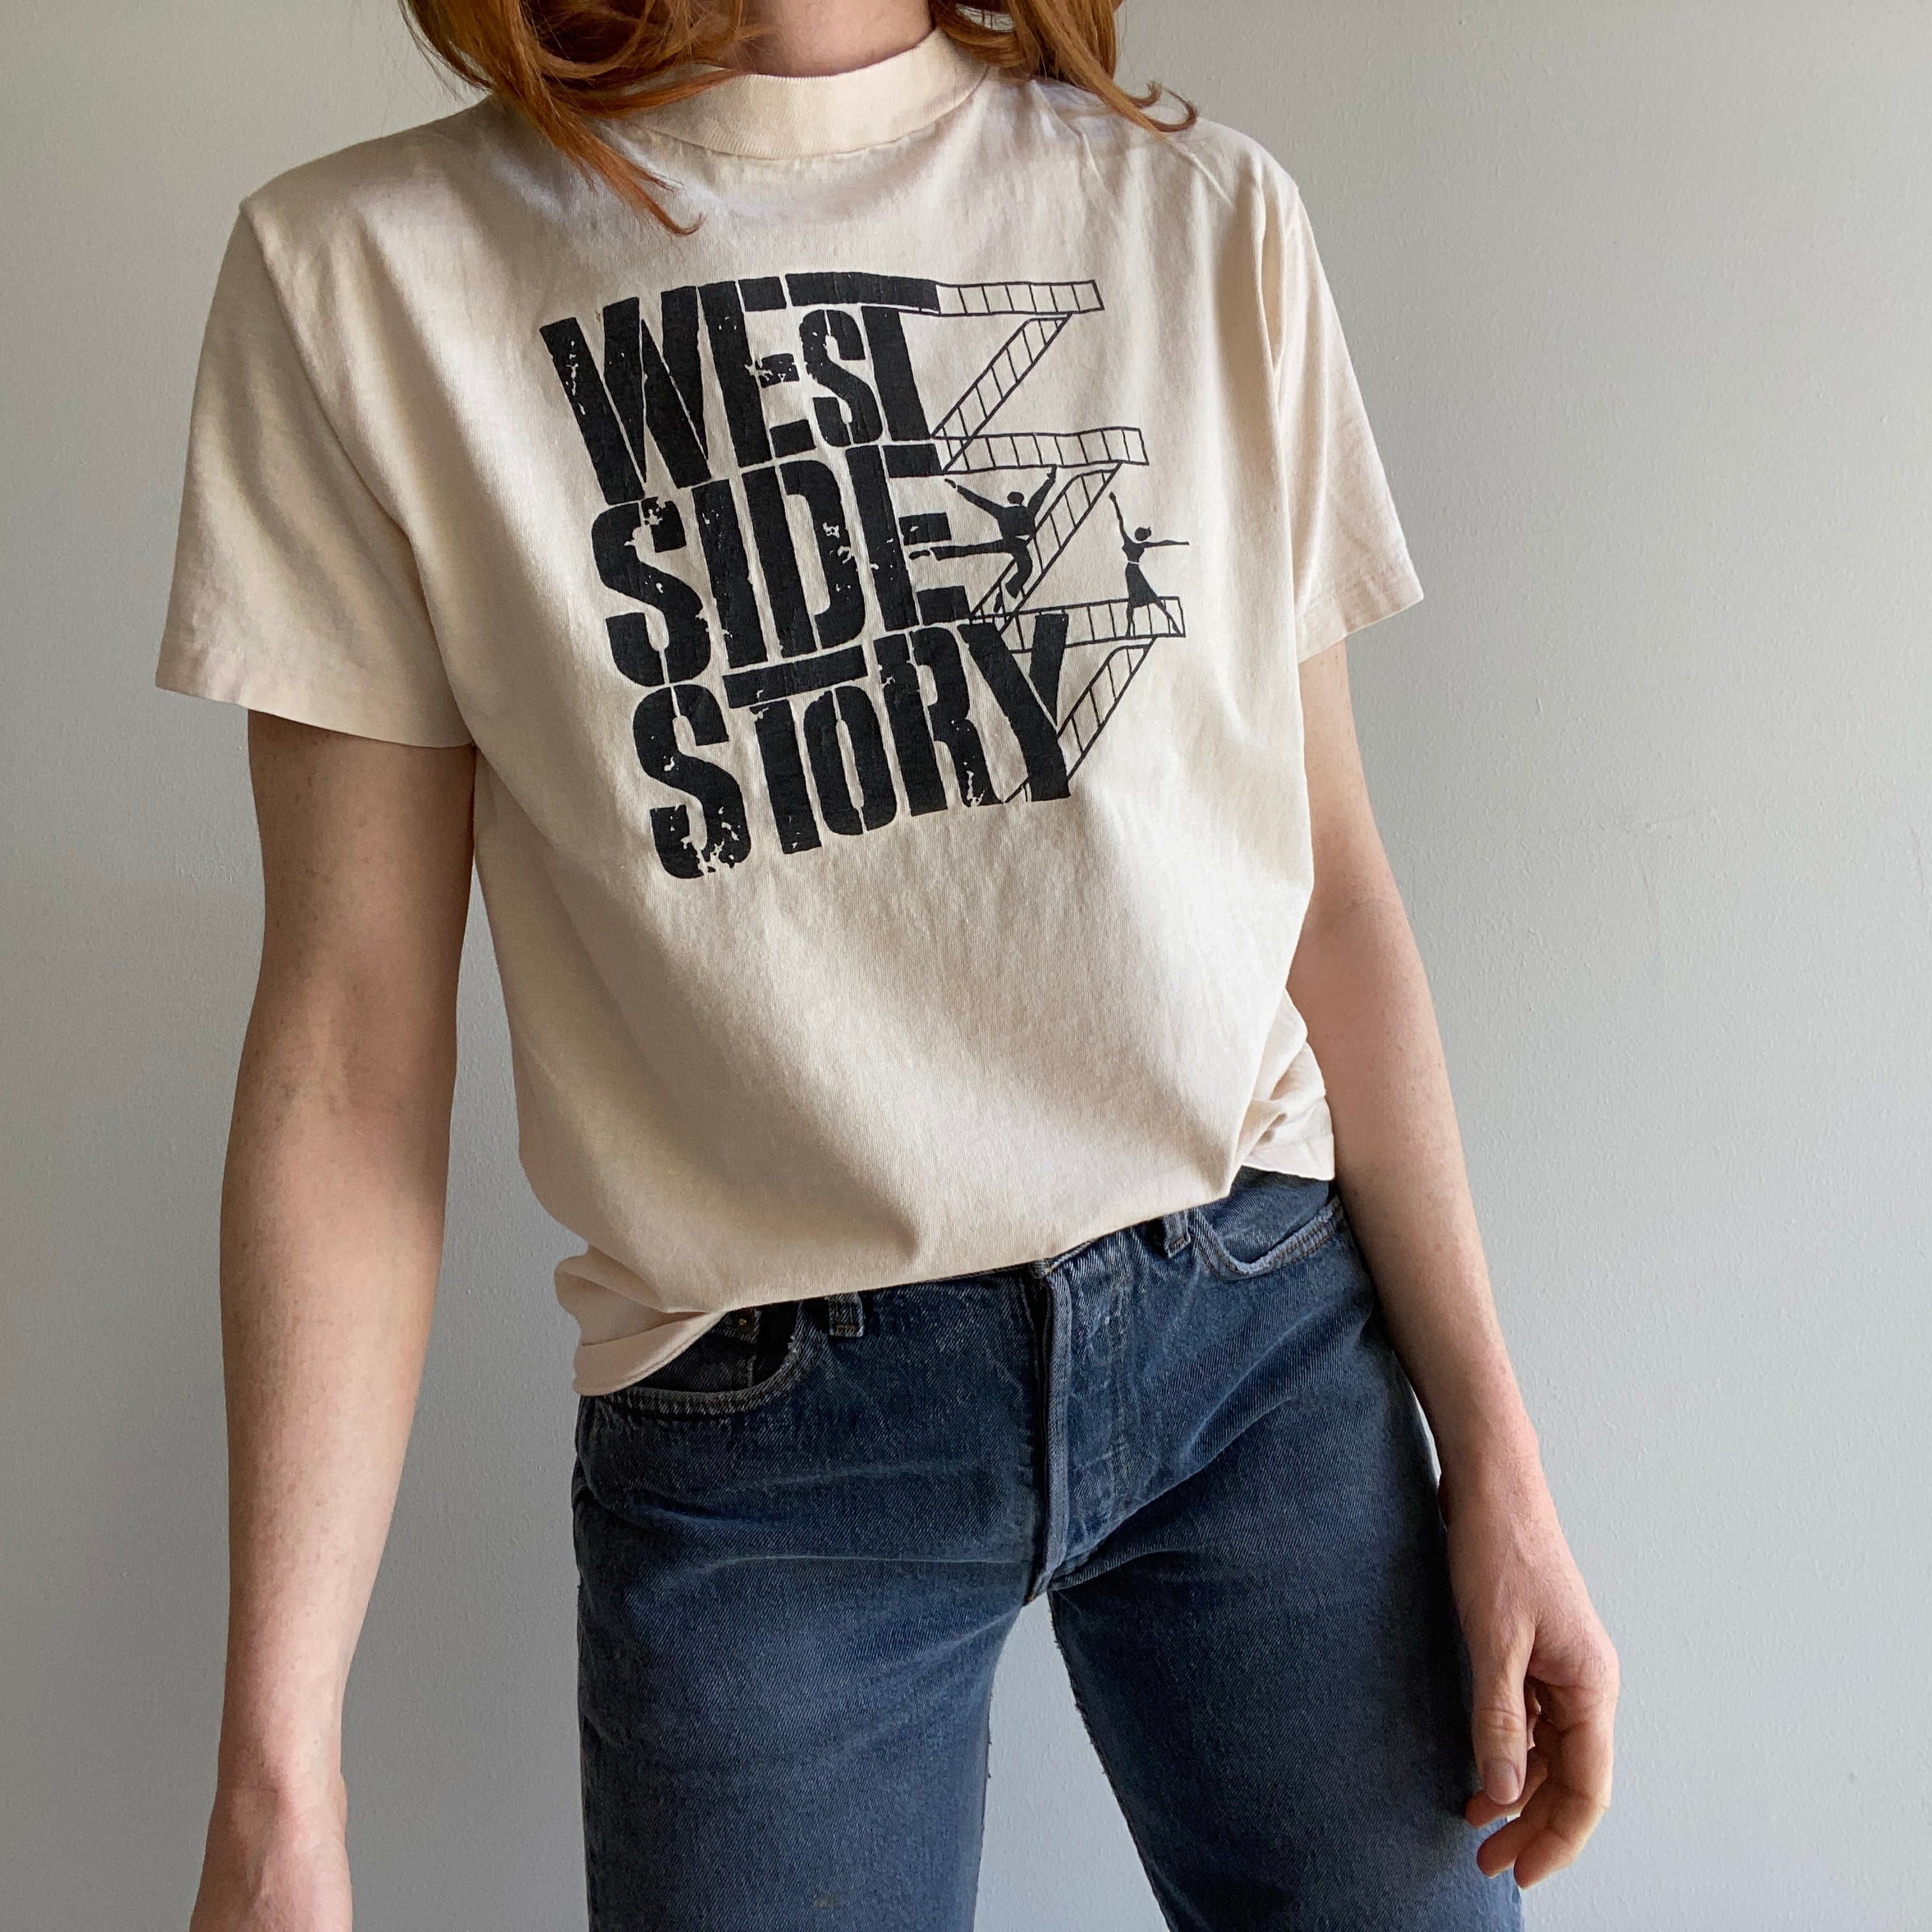 1980 West Side Story Hanes Beefy Tee Epic Soft Cotton T-Shirt